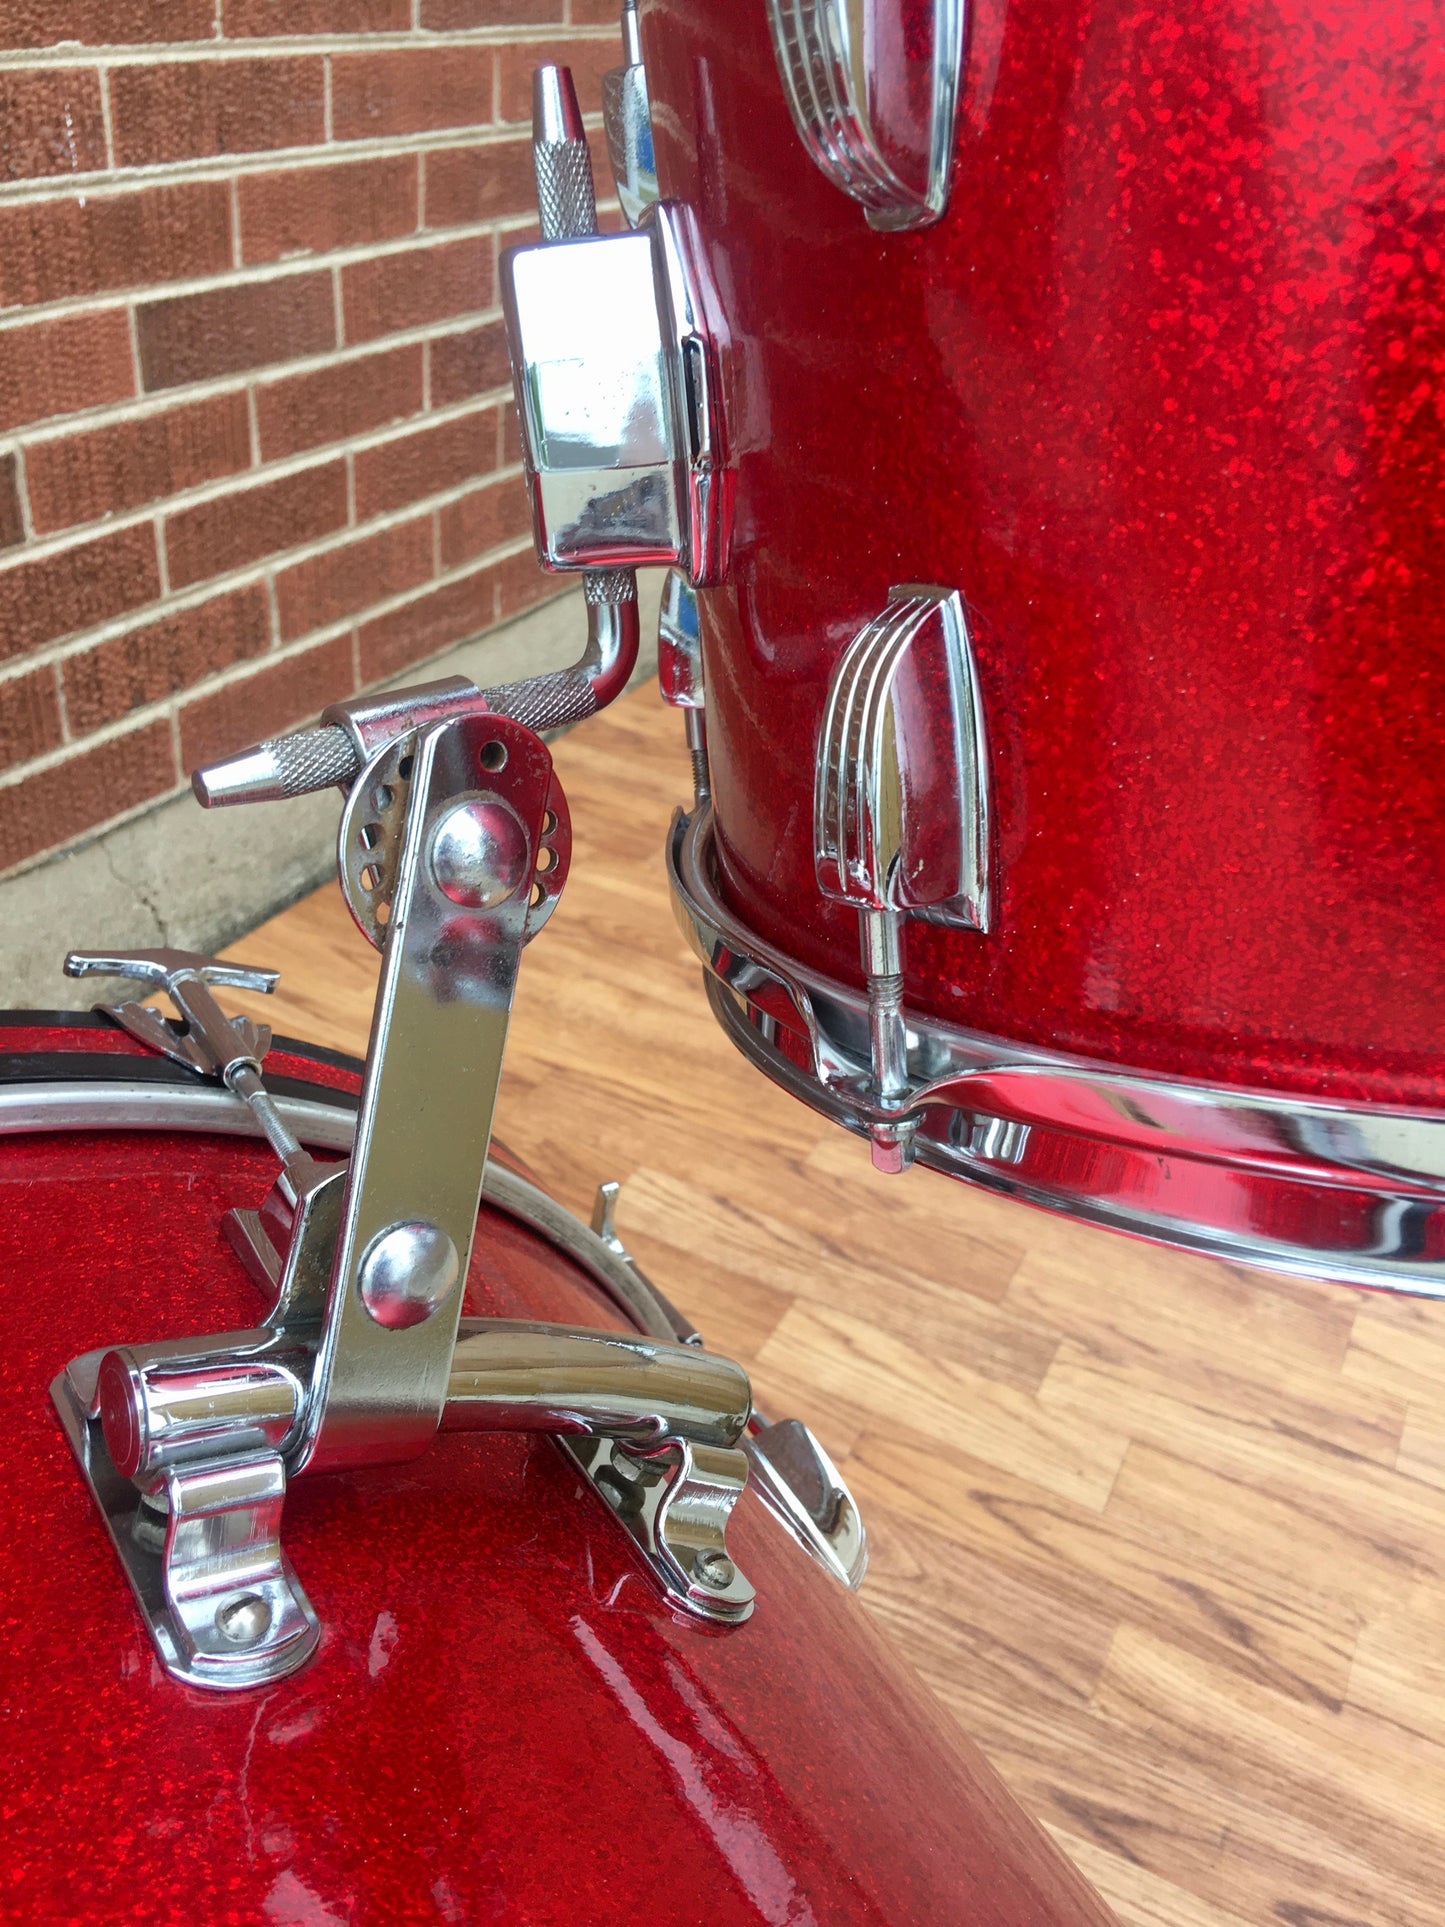 1965 Ludwig Down Beat Drum Set - Red Sparkle 20/12/14